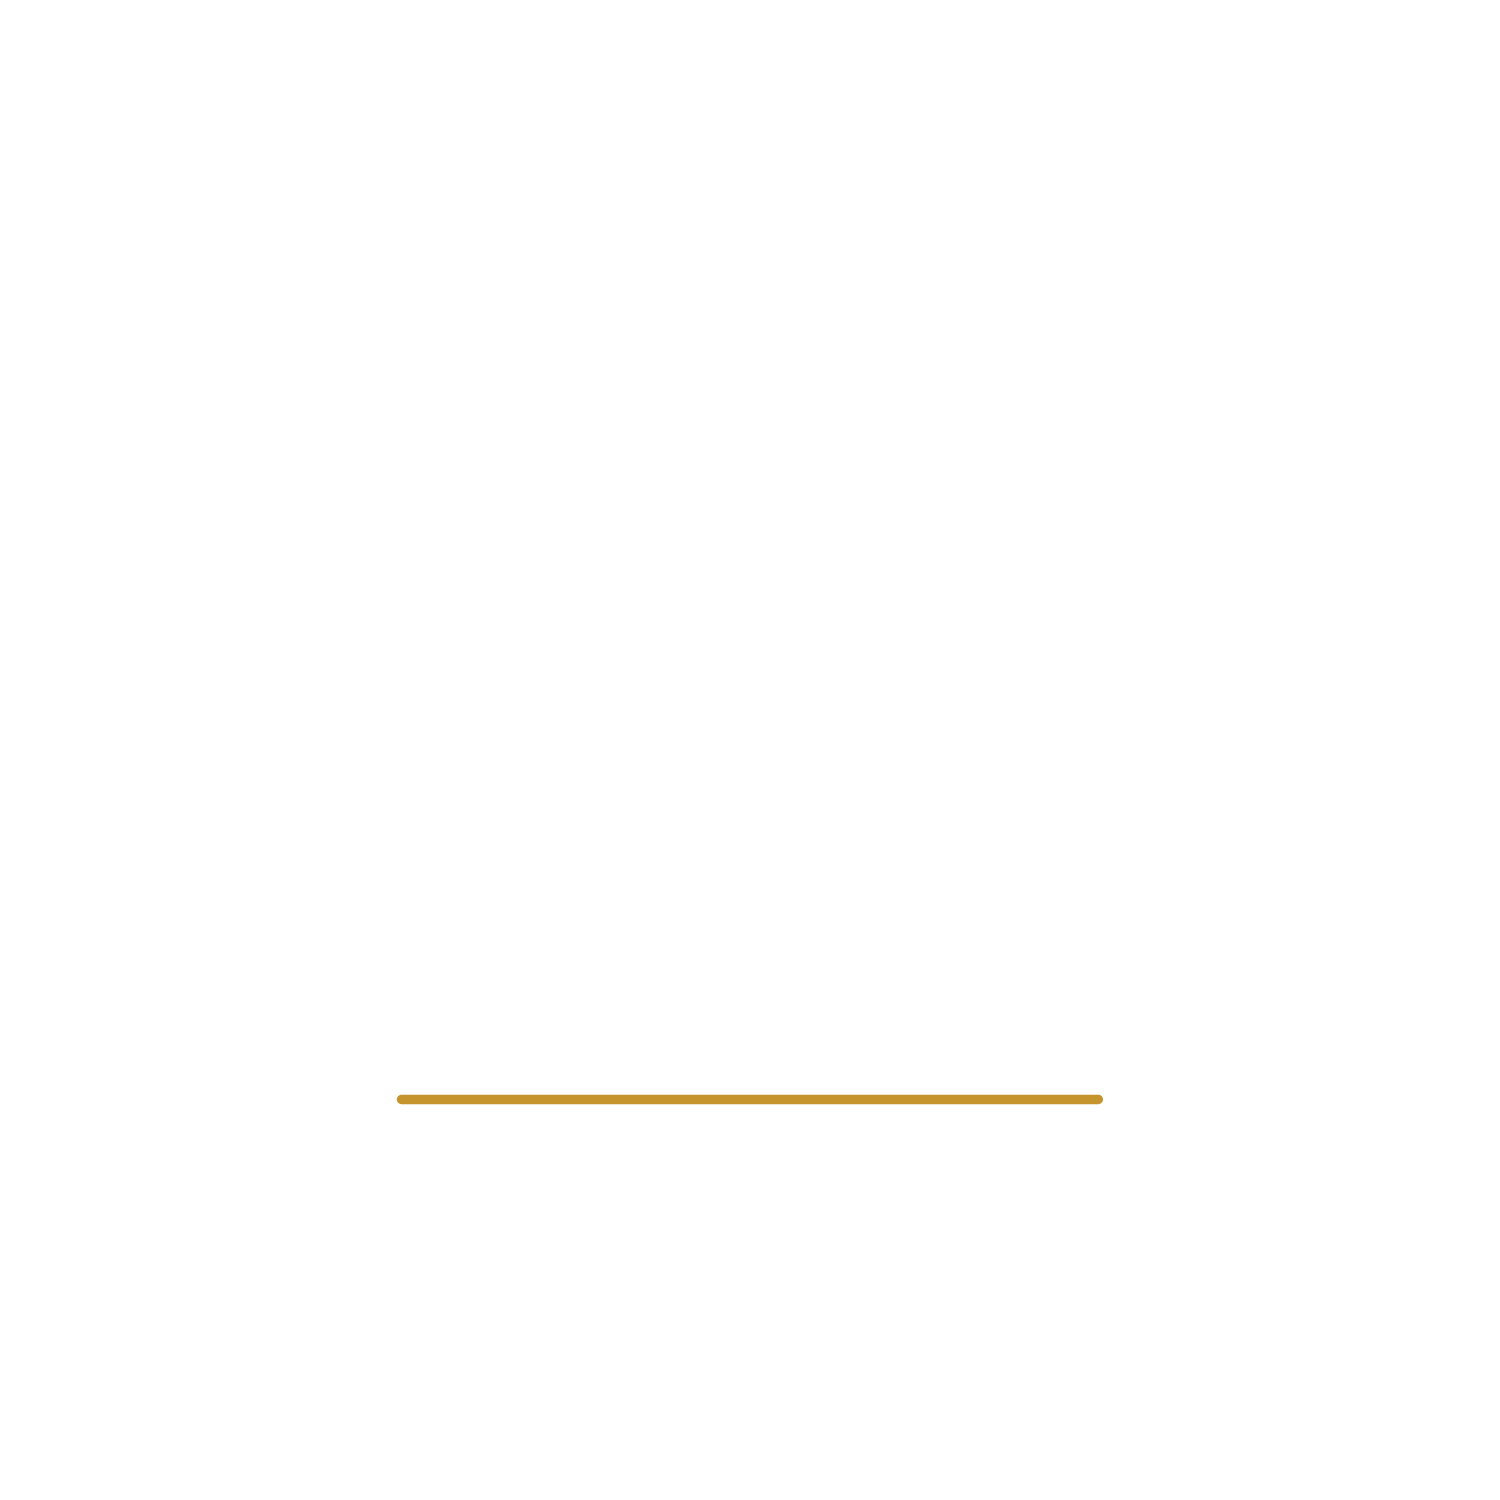 Sign Up And Get Best Deal At DeBruycker Charolais